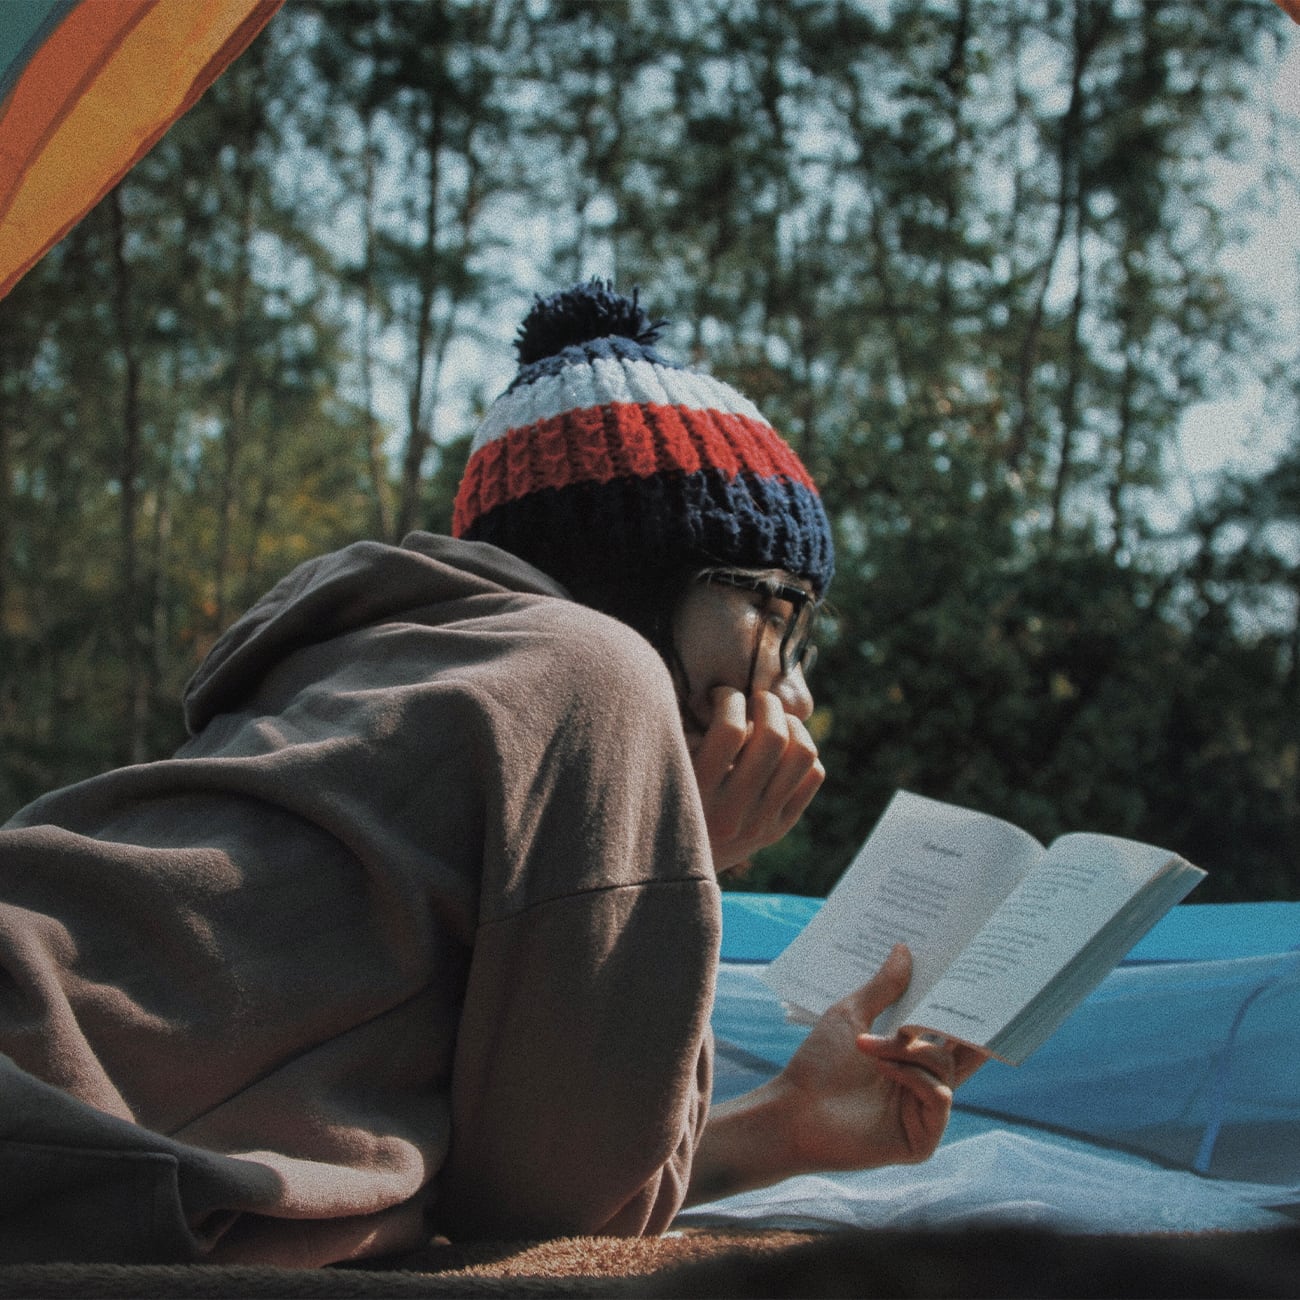 Woman reading book from inside tent